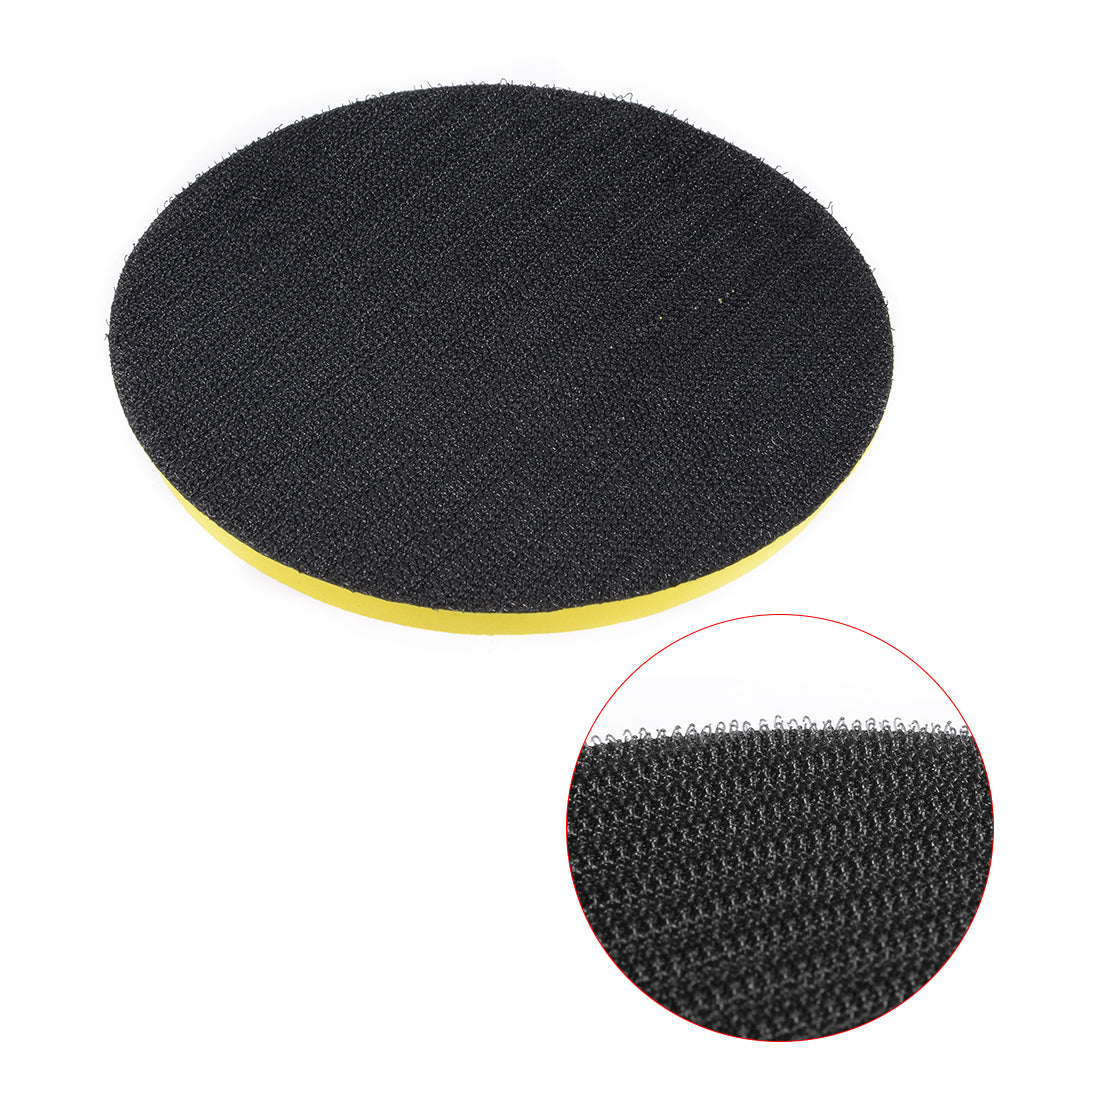 Uxcell Uxcell 3 Inch Hook and Loop Backing Backer Pads with M10 Female Thread for Diamond Polishing Pads